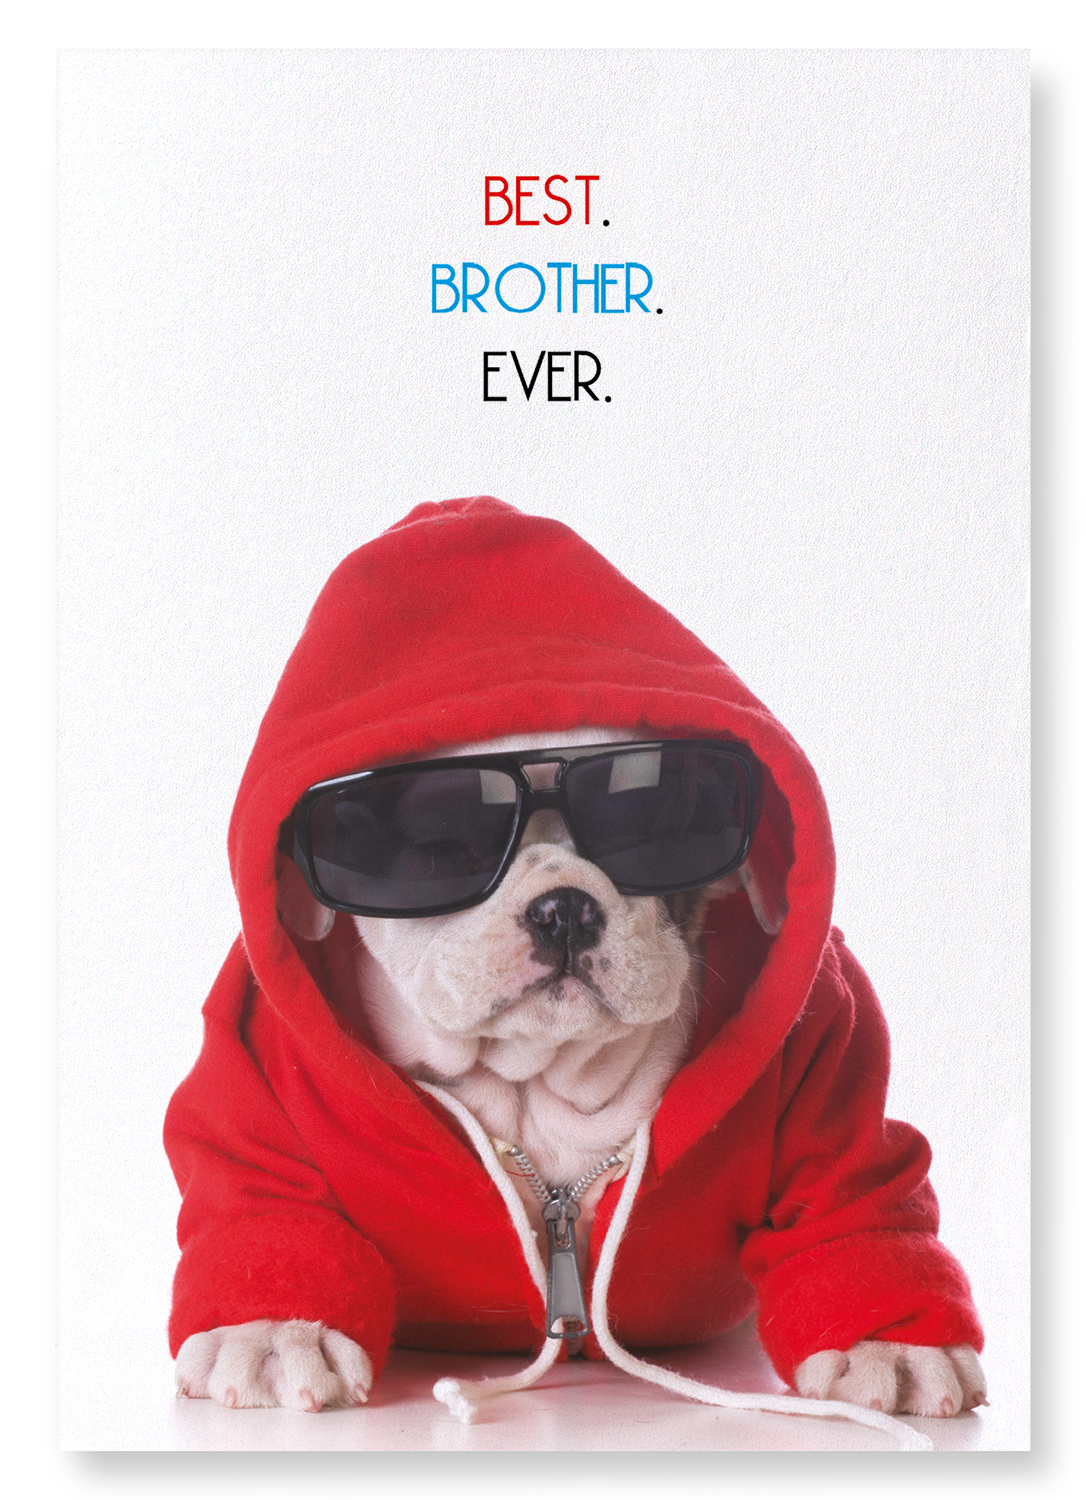 BEST BROTHER EVER: Funny Animal Art print